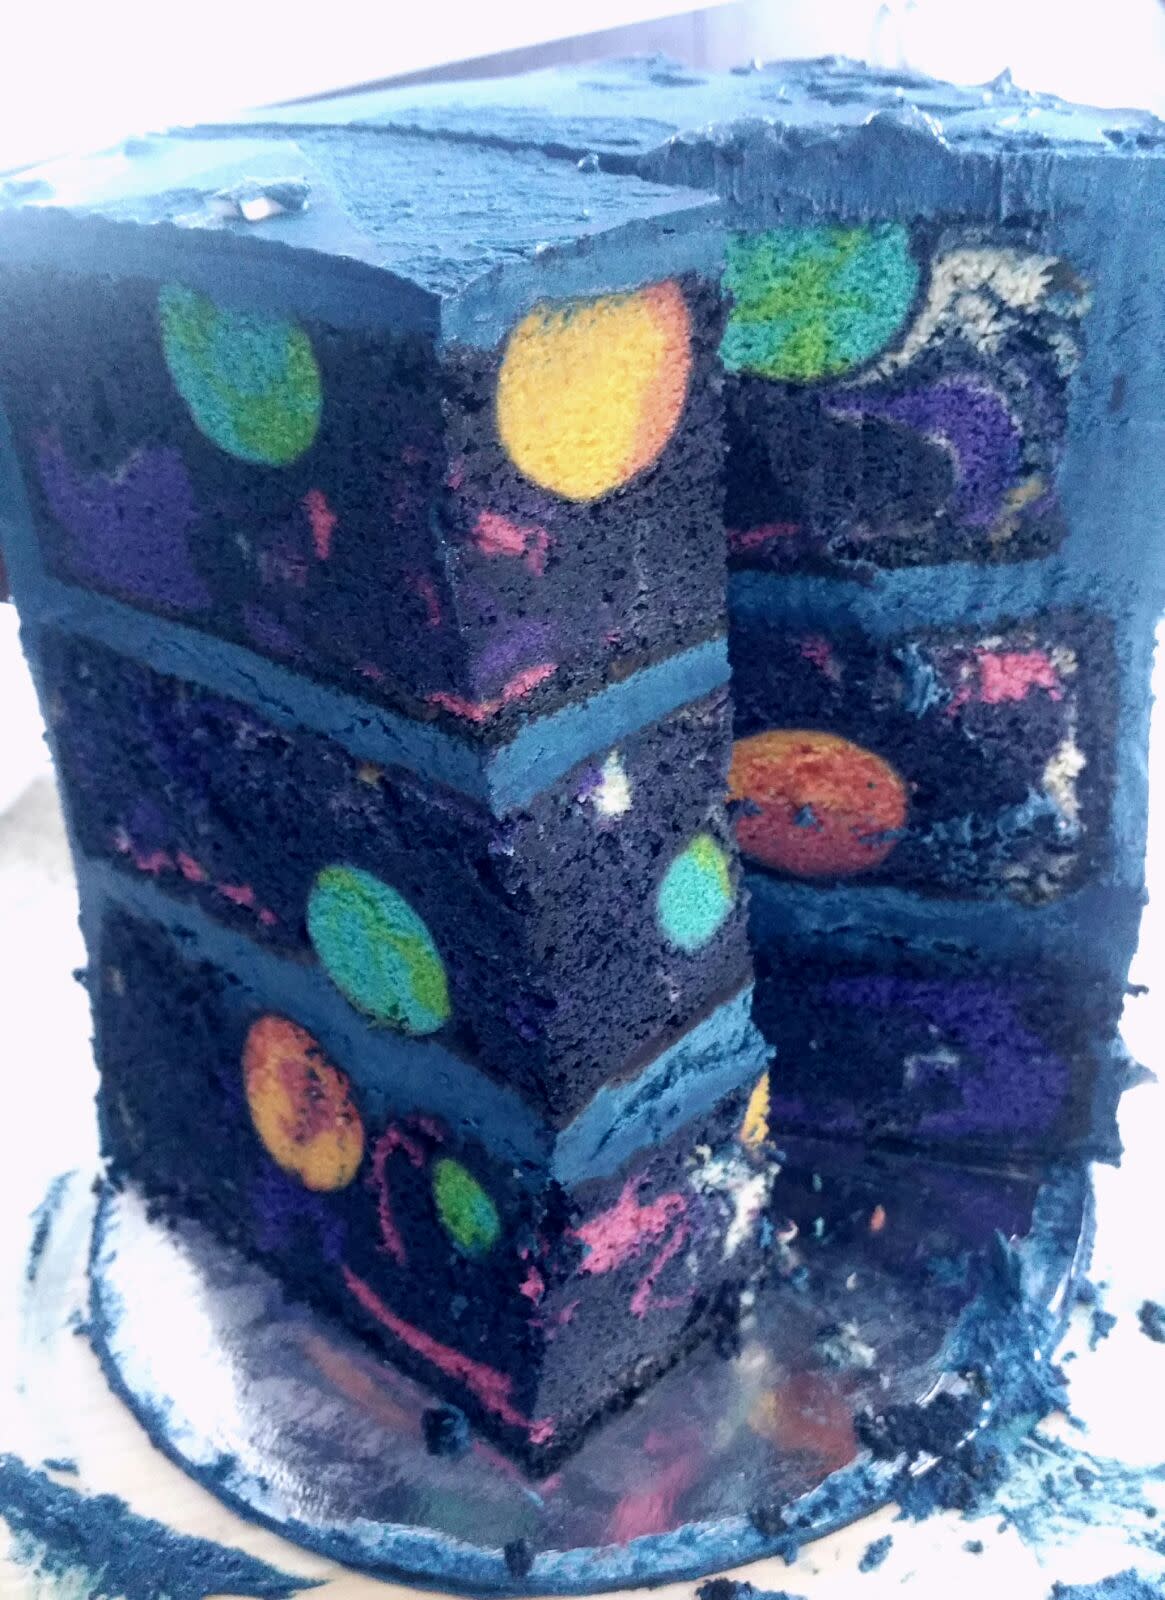 Stop what you’re doing, there’s an actual galaxy inside this birthday cake